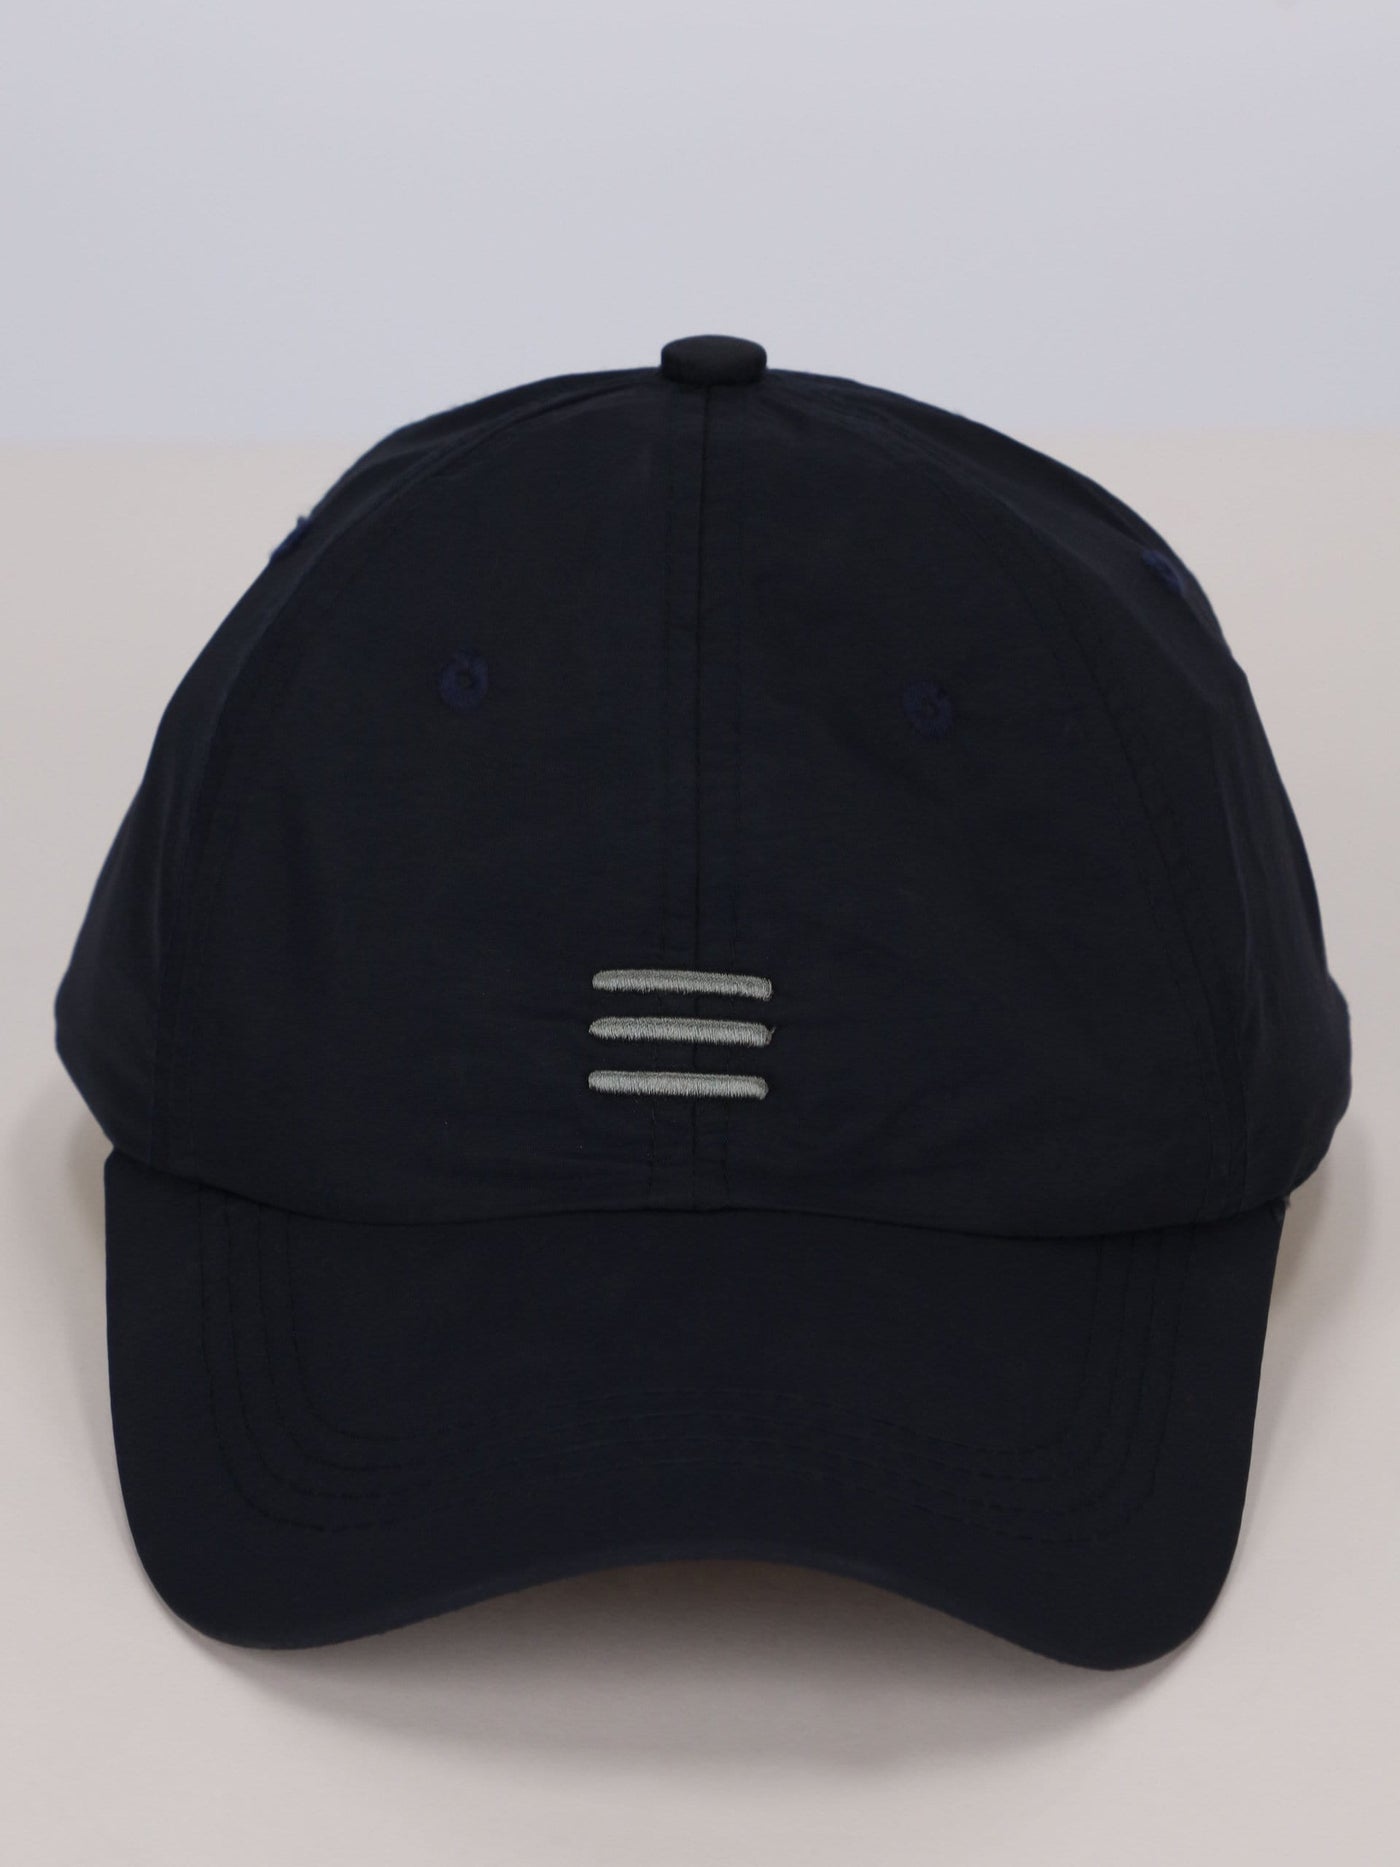 OR Hats Navy / Os Basic Cap with Front 3 Lines